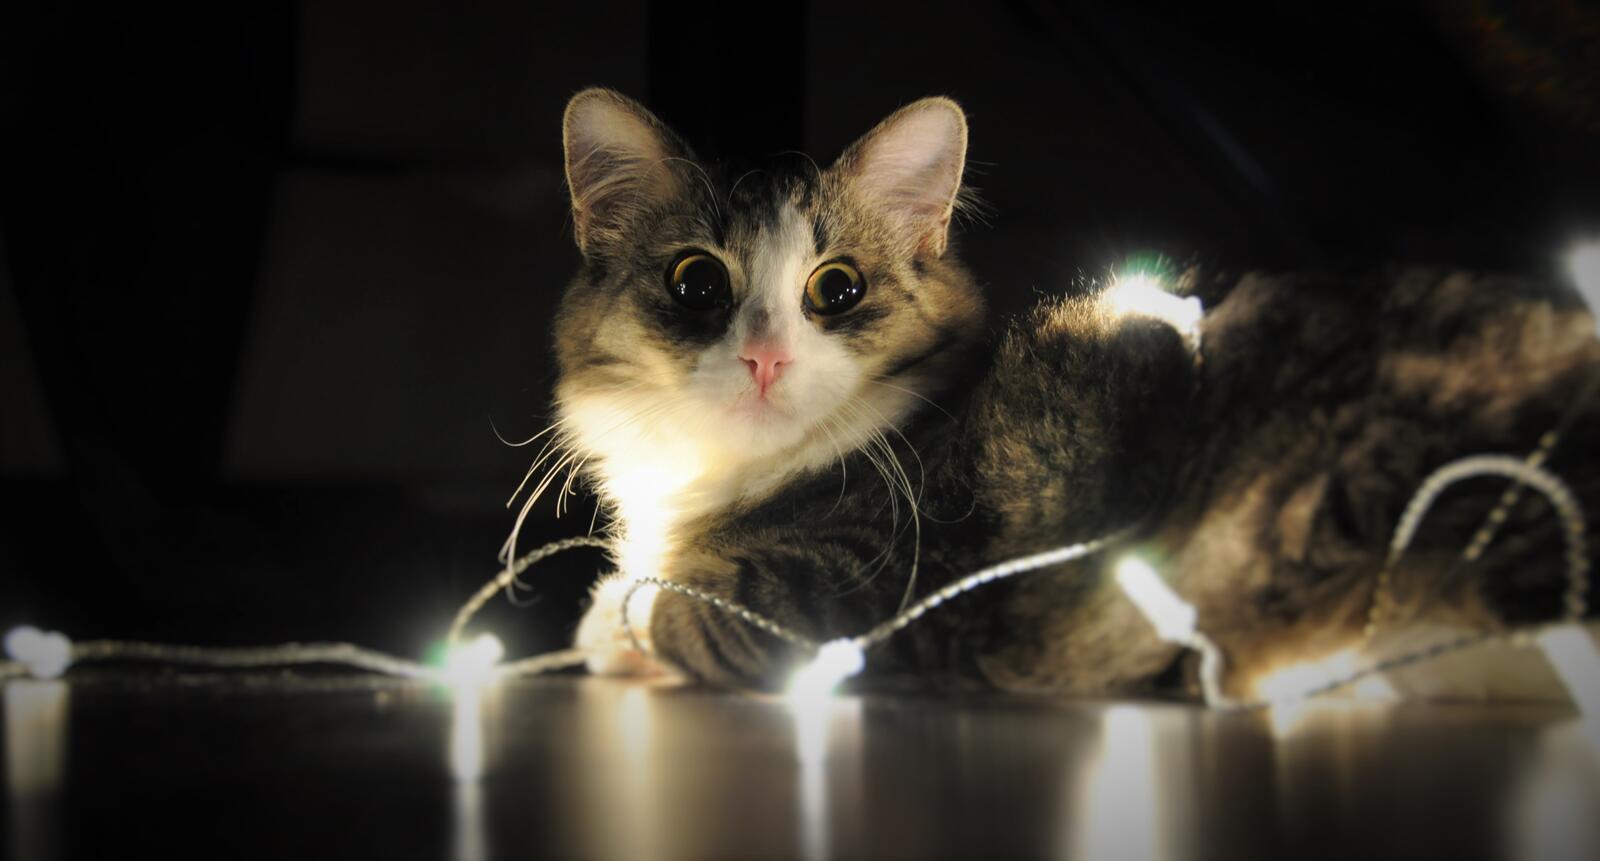 Free photo The cat got tangled up in the Christmas lights.